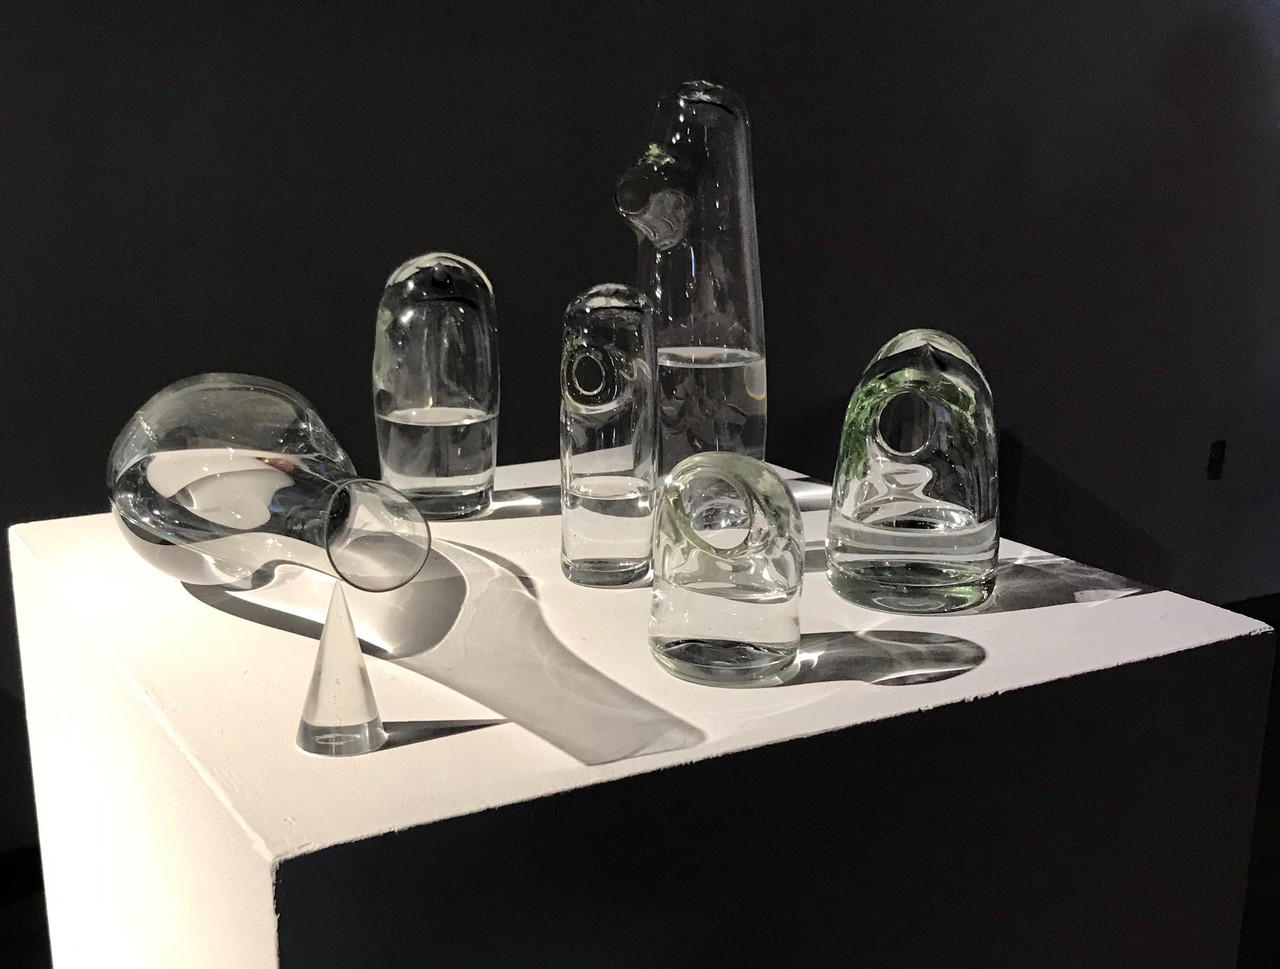 Seven pieces of glassware, most filled with water, sit on a platform in front of a black background